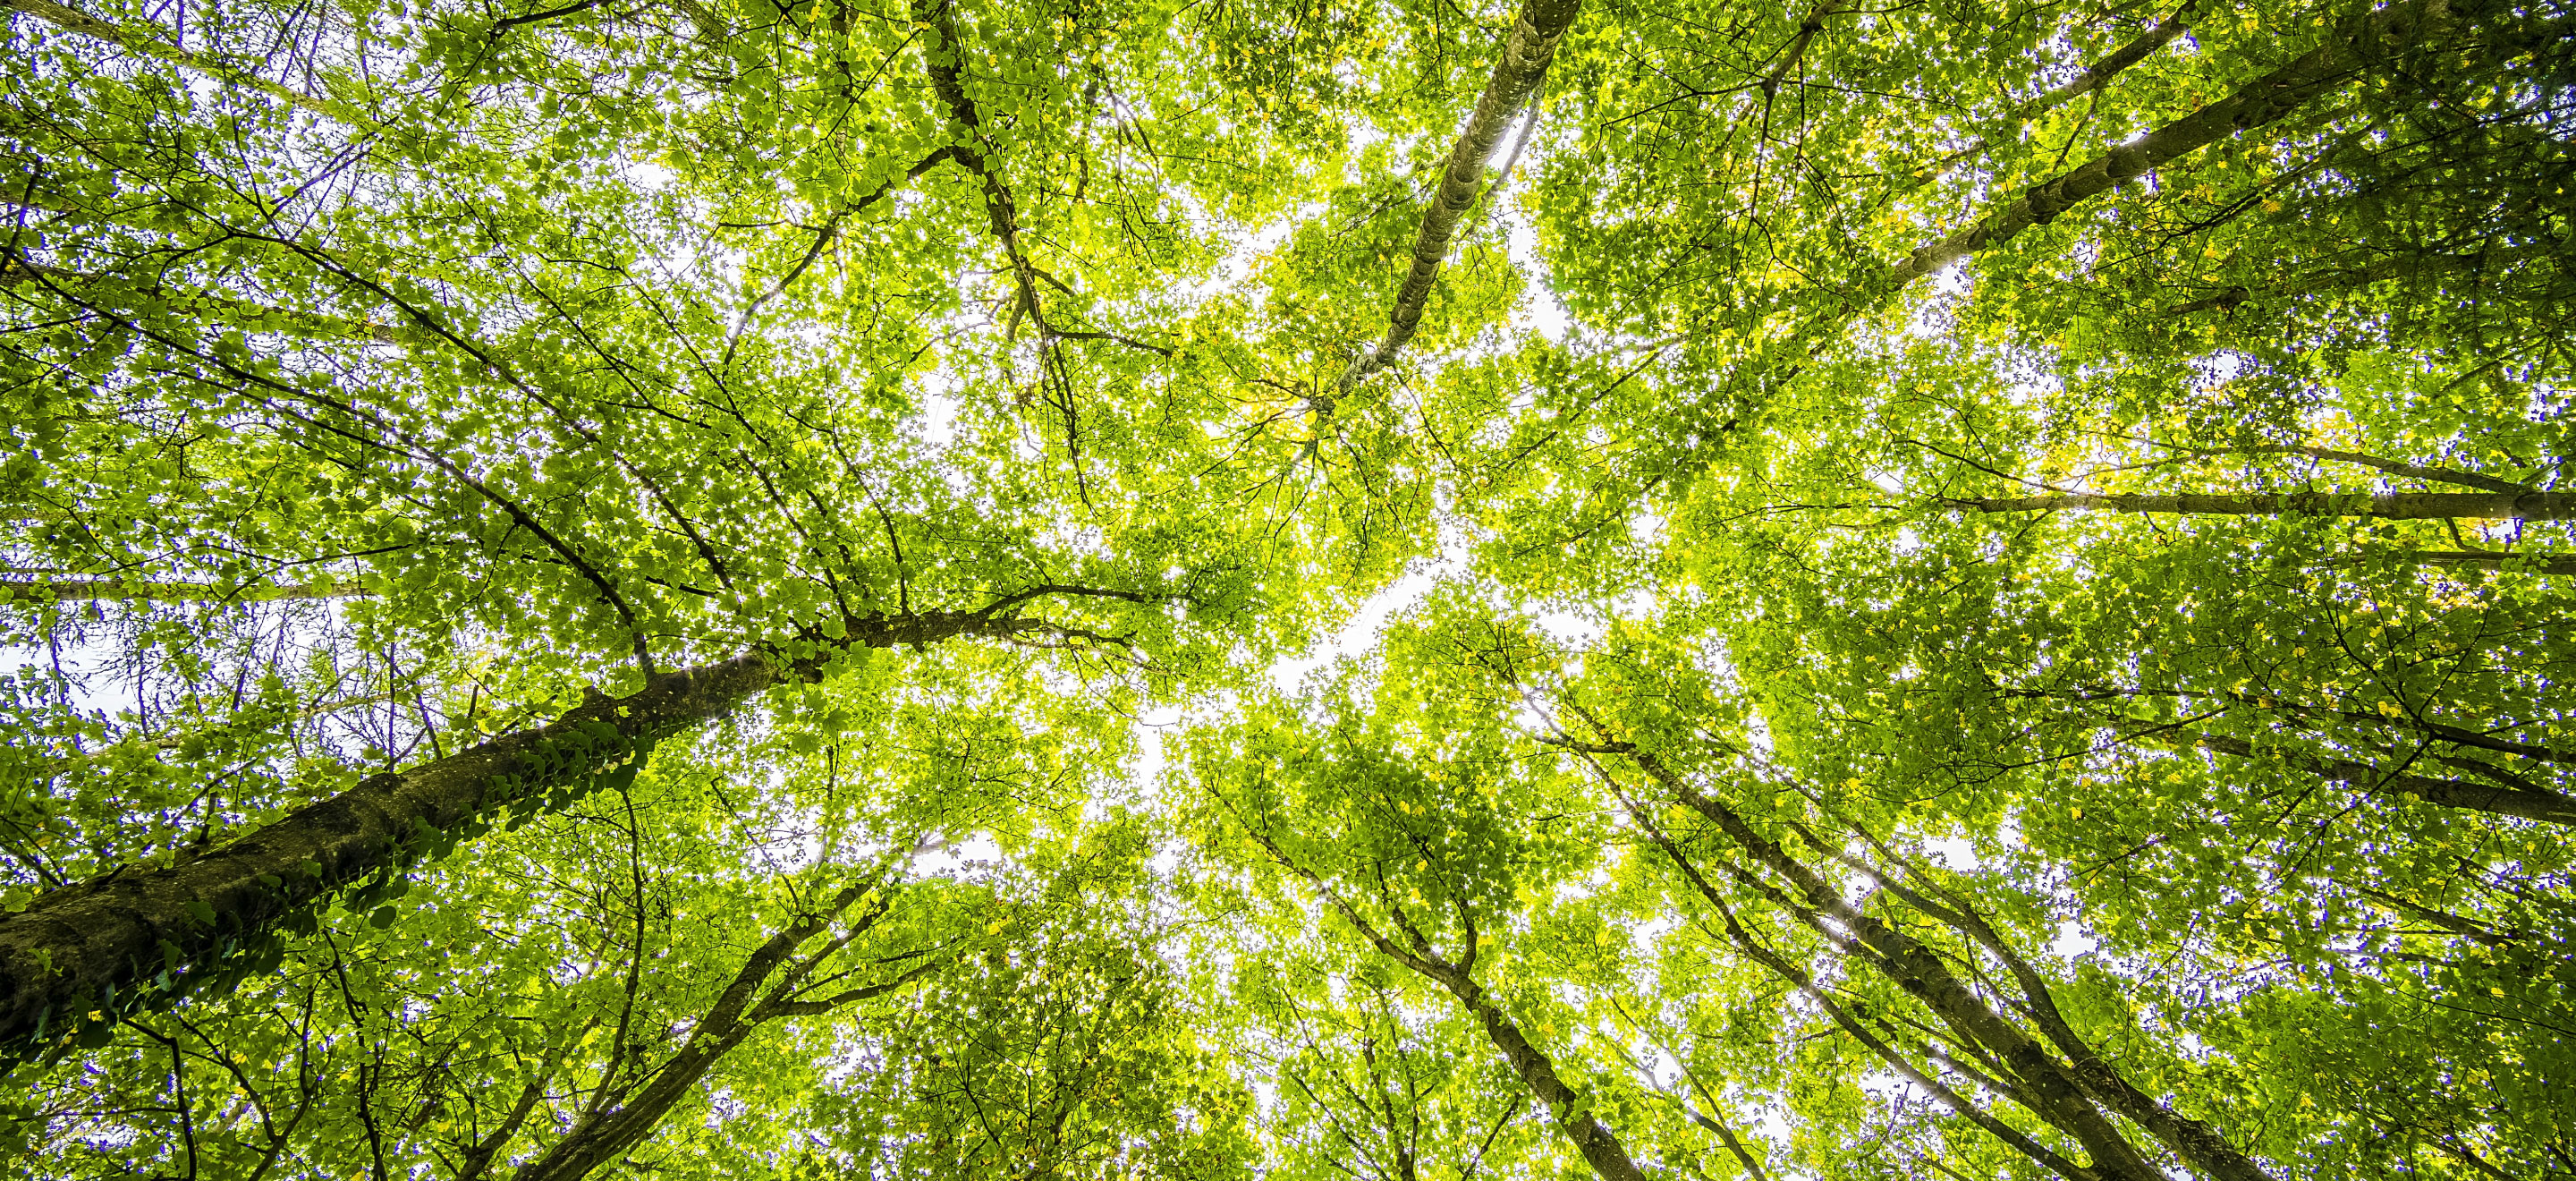 View looking up to the underside of a green tree canopy